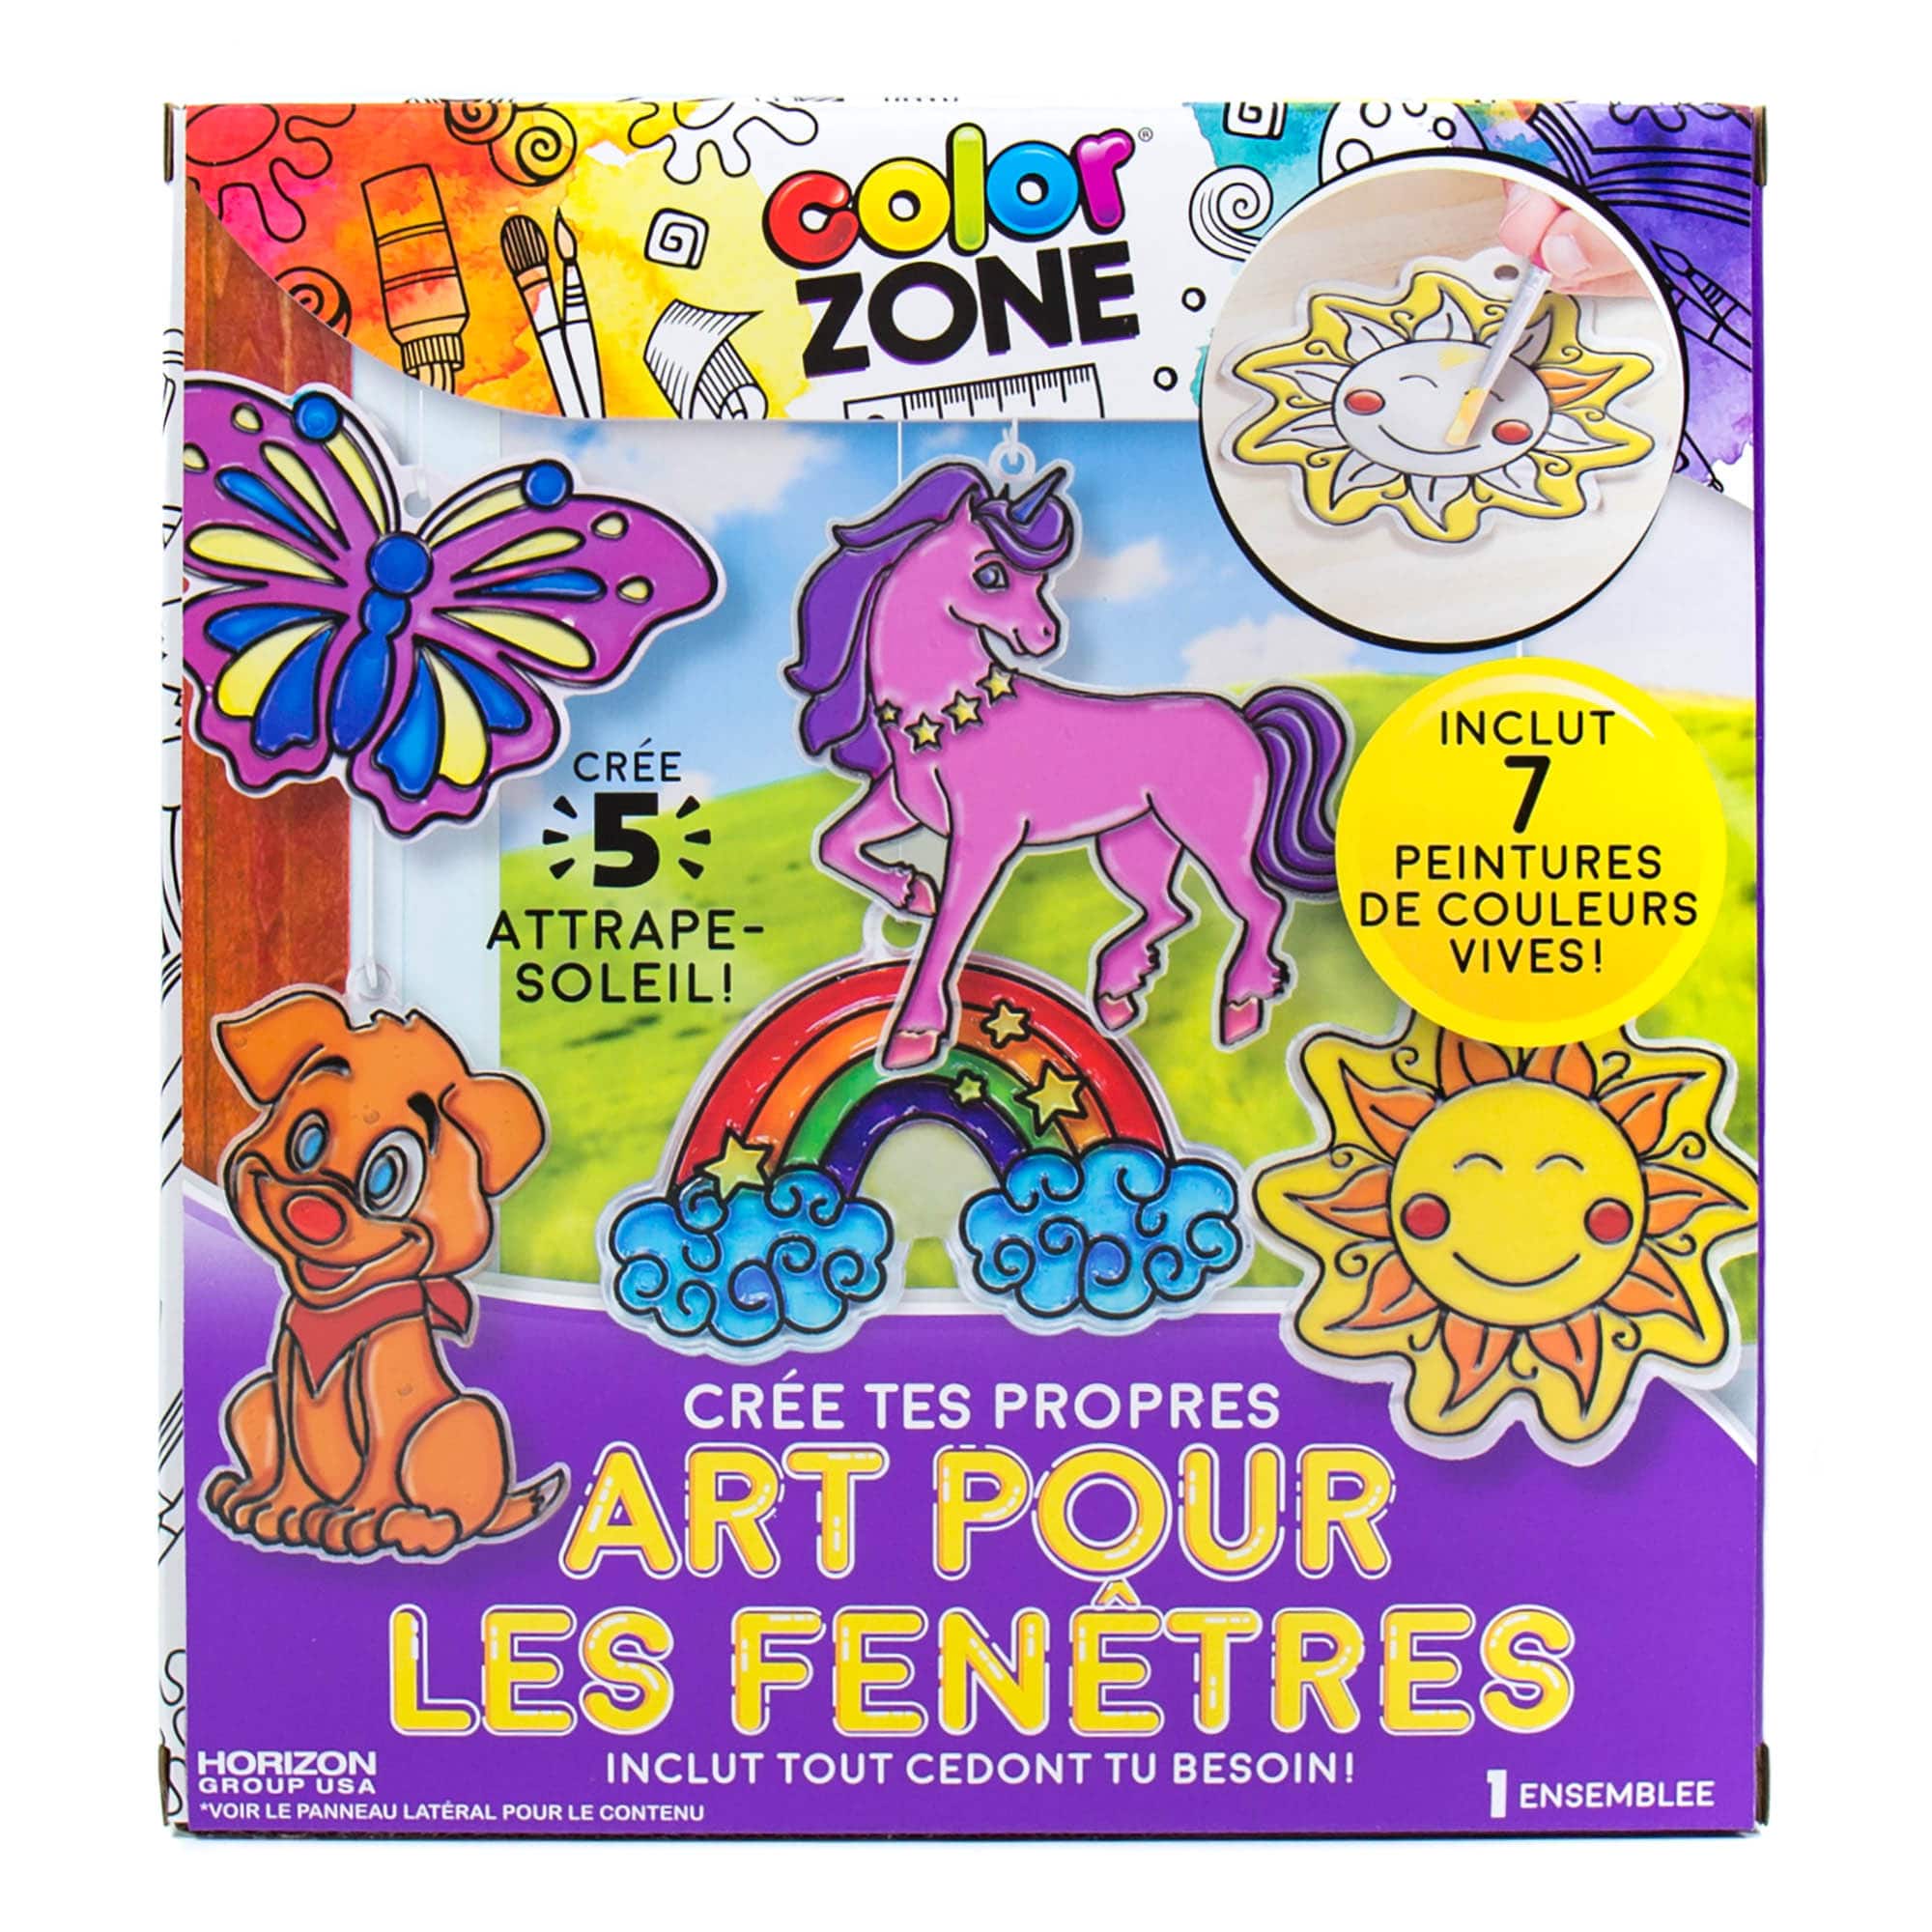 12 Pack: Color Zone&#xAE; Create Your Own Window Art